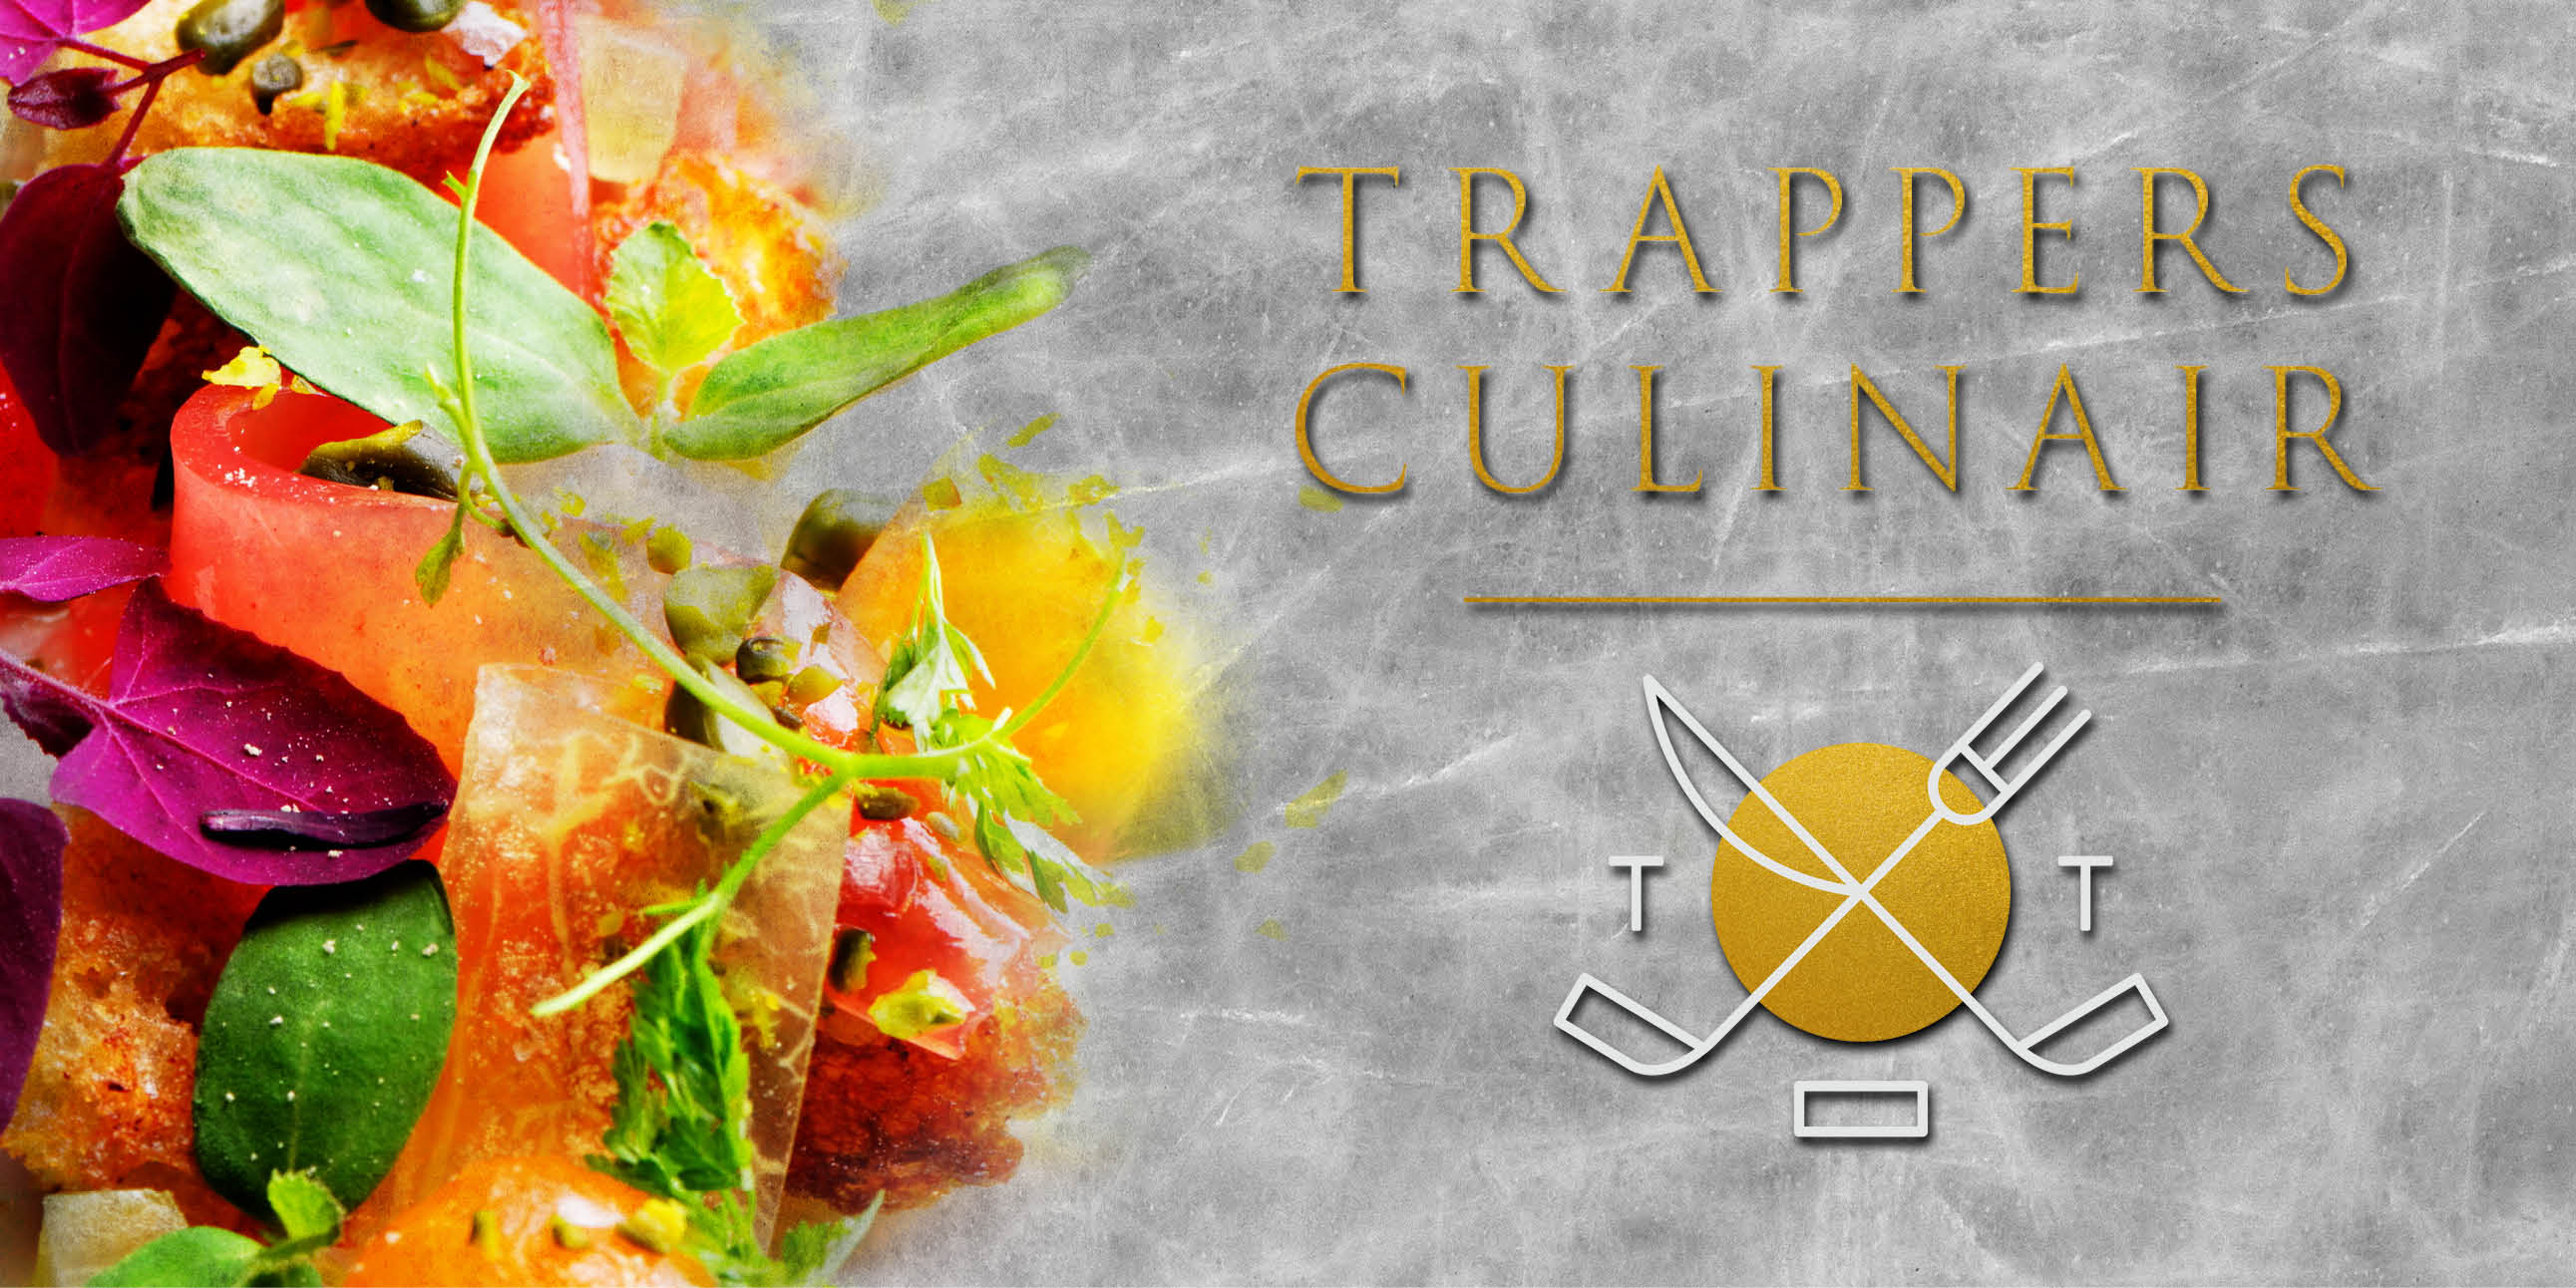 TRAPPERS CULINAIR